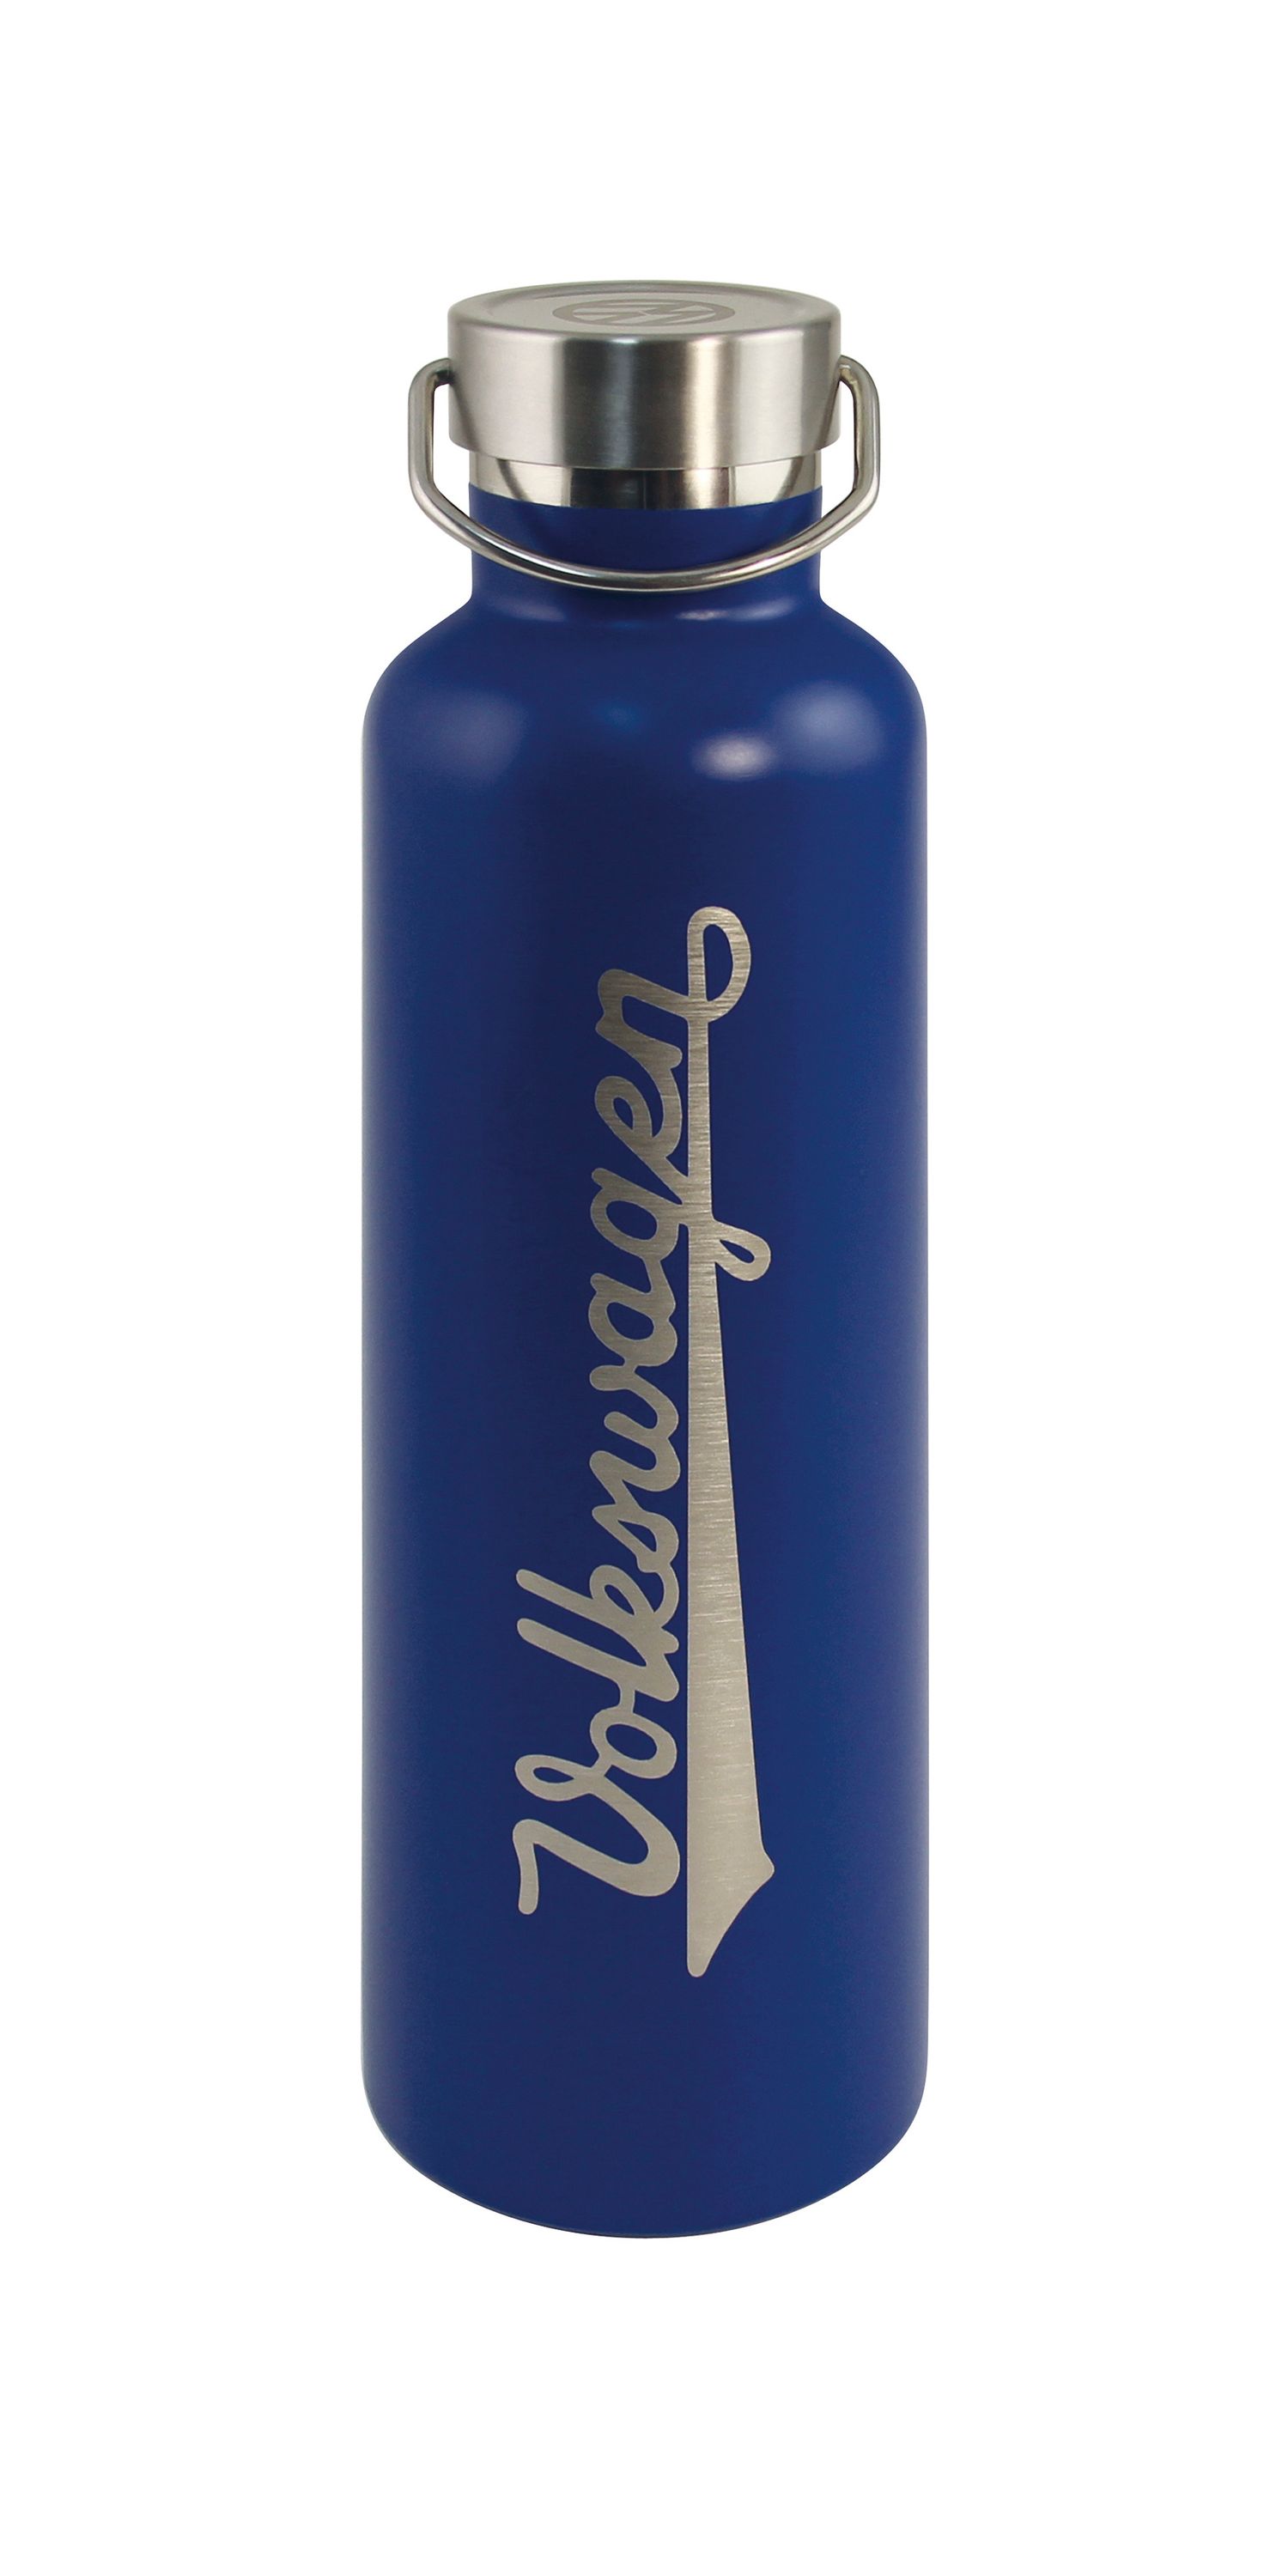 VW Stainless Steel Thermos Bottle, Hot/Cold, 735ml